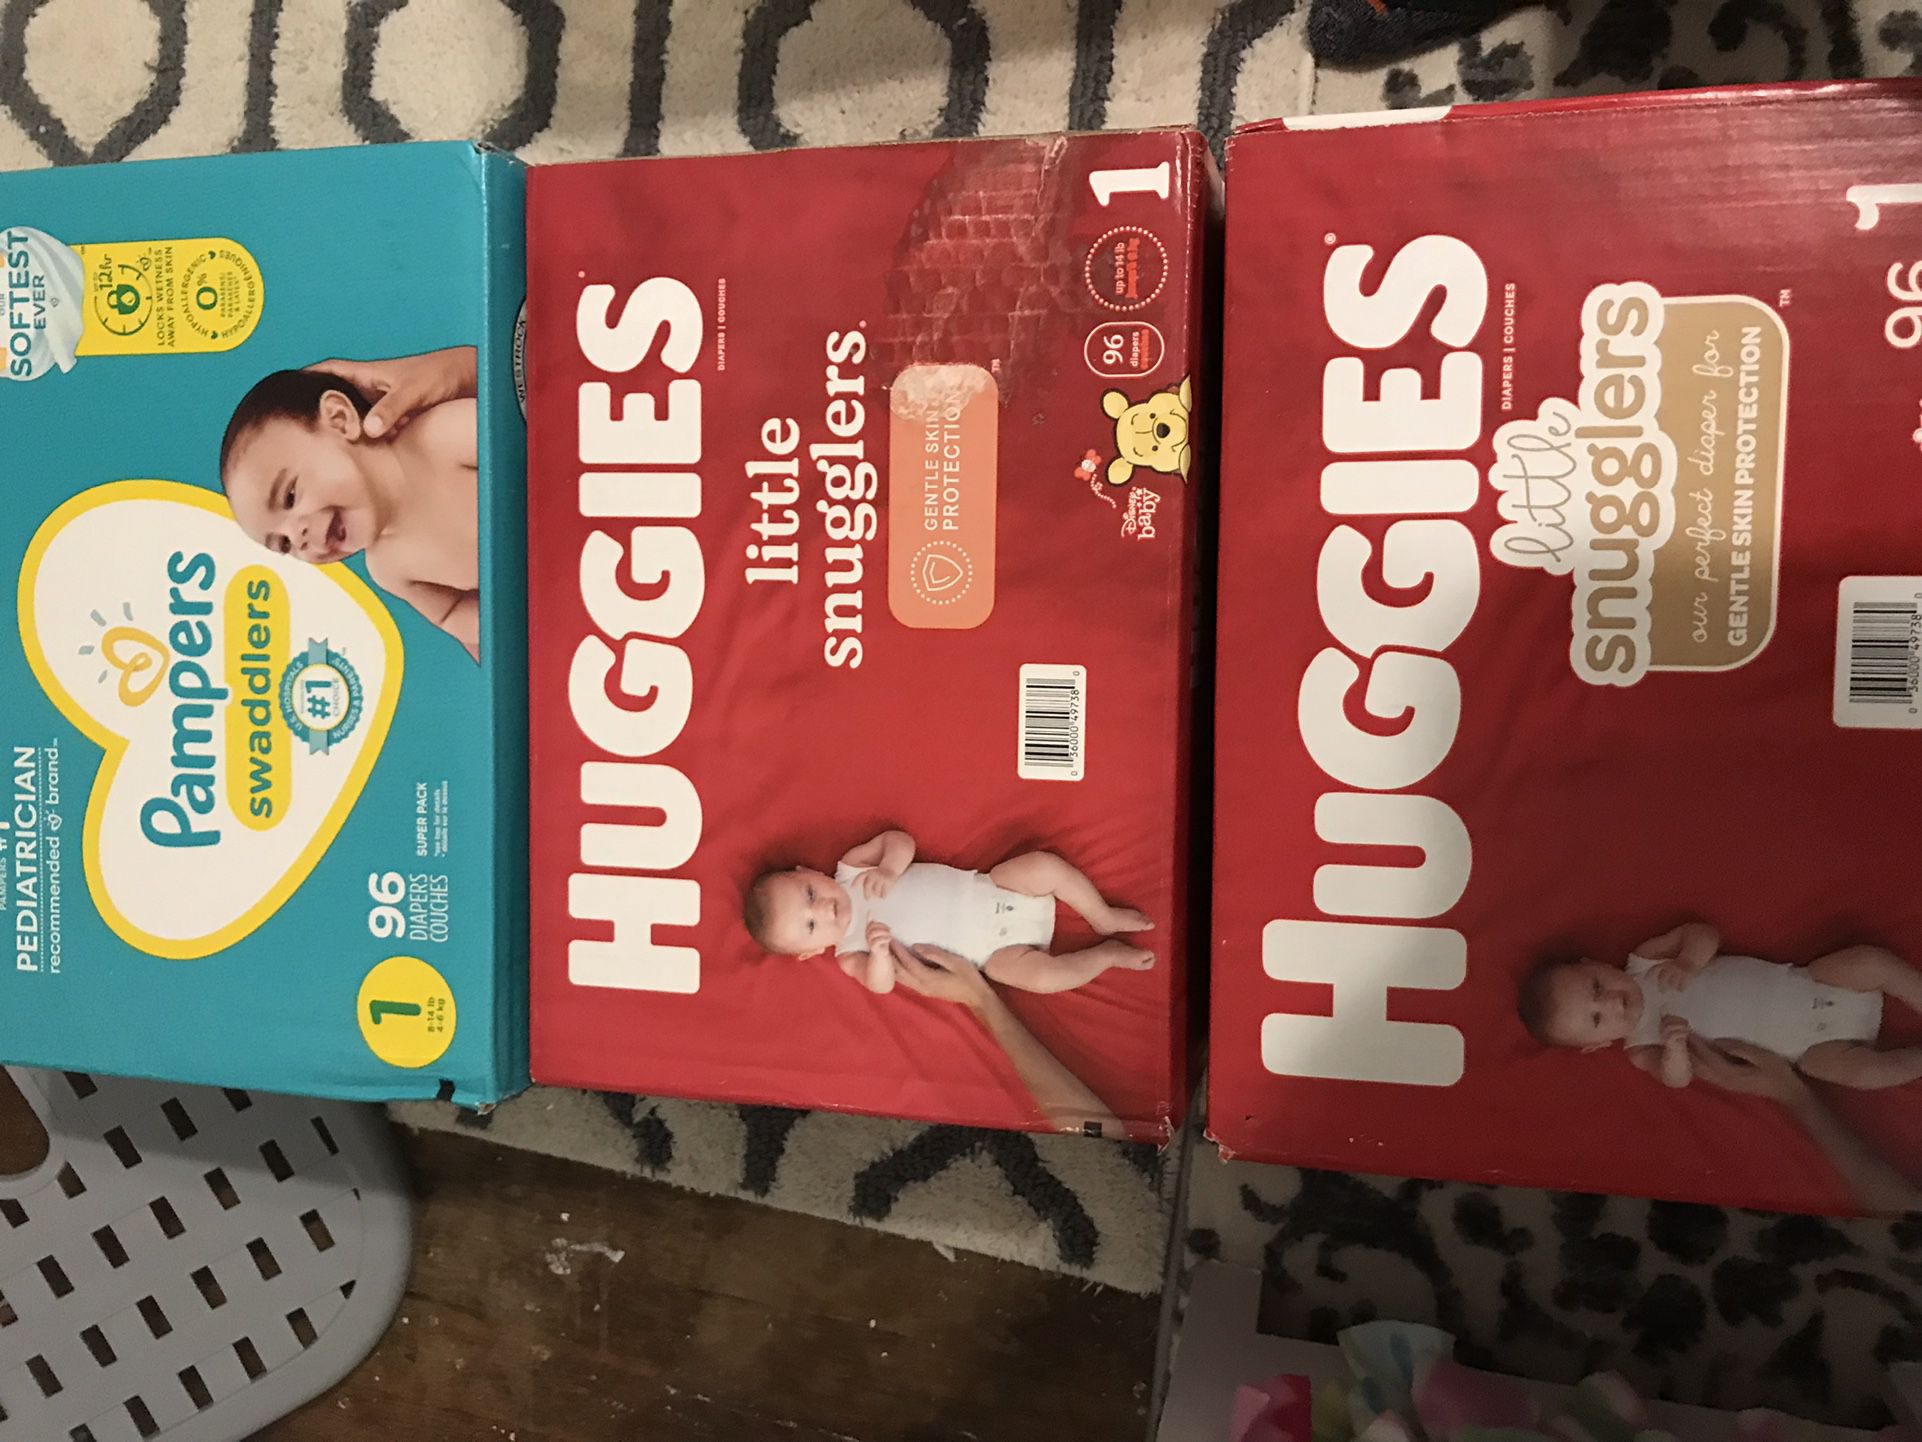 Huggies Pampers Size 1 